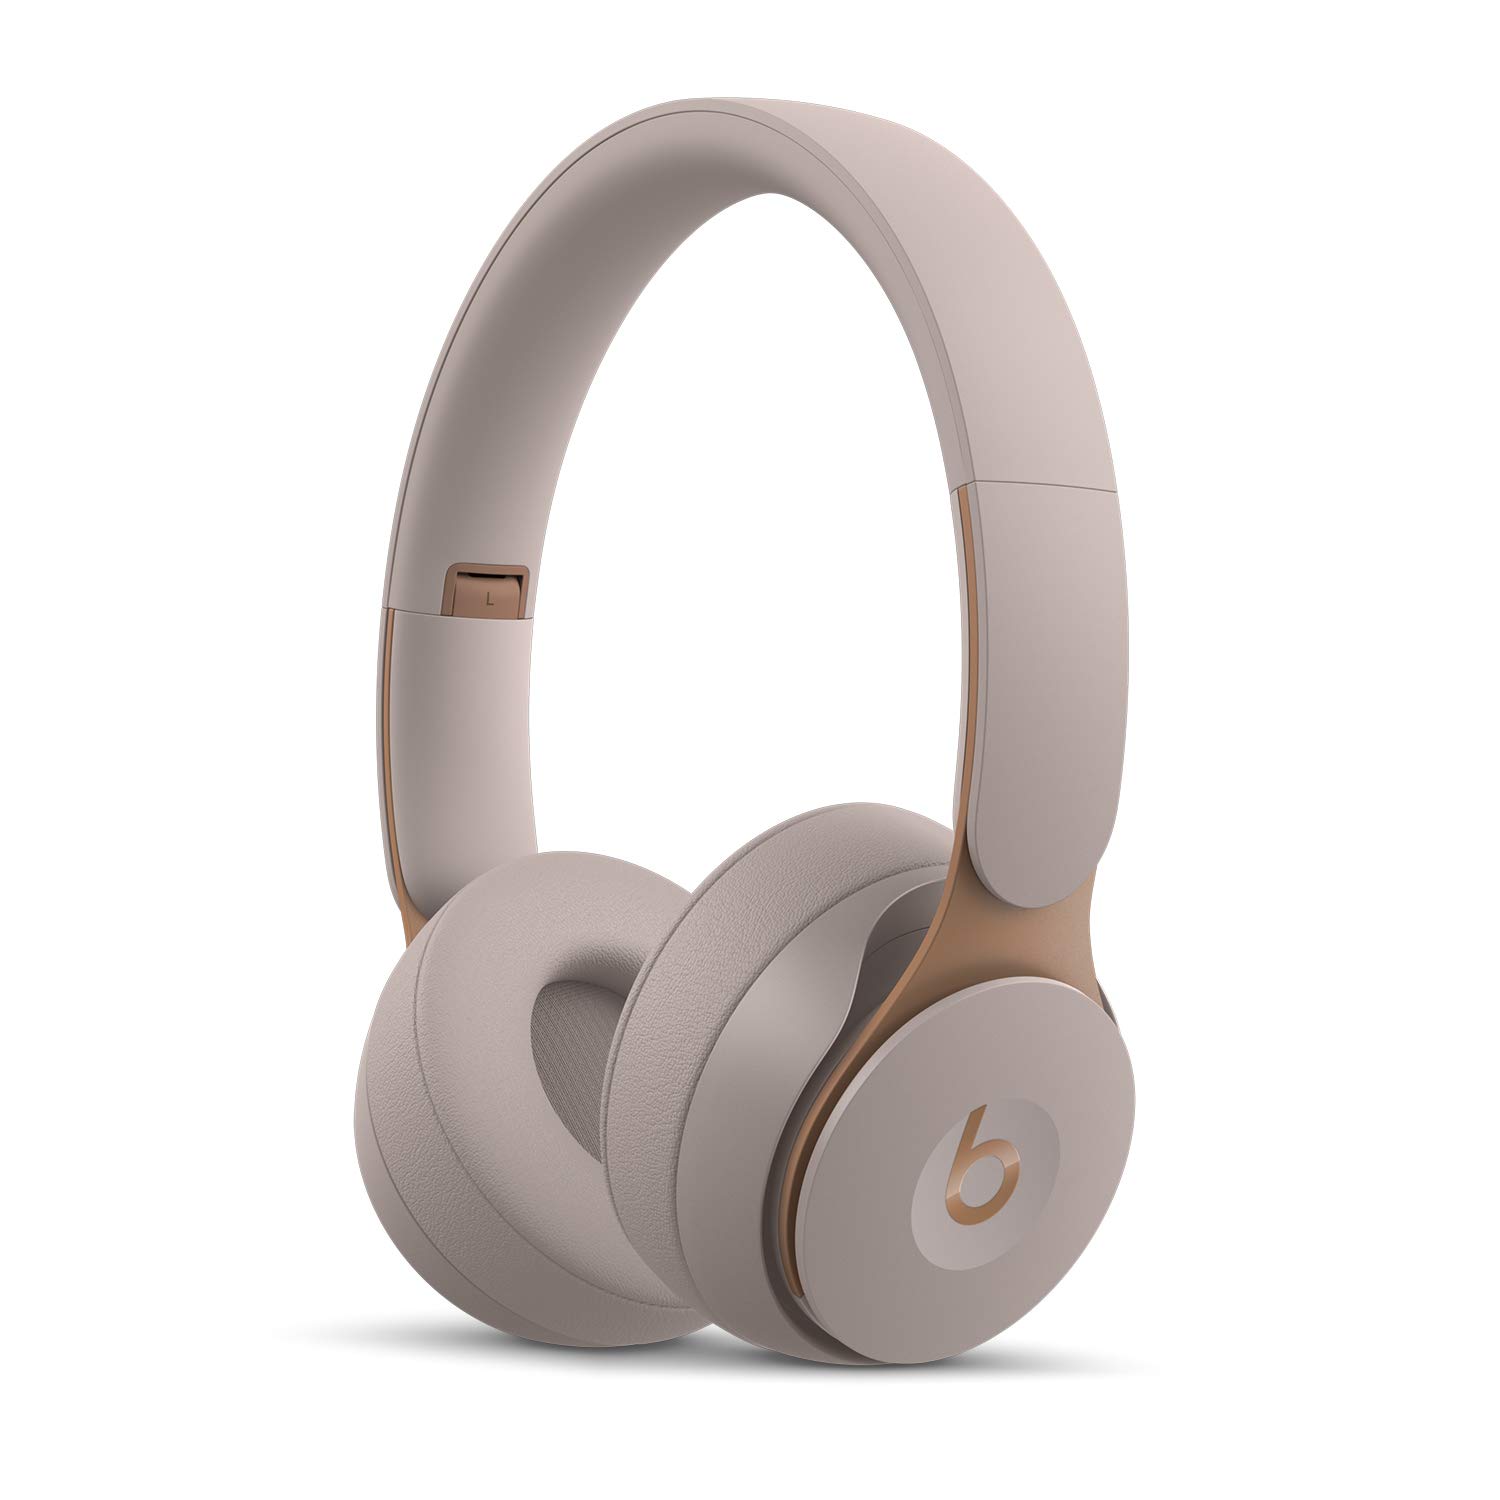 Beats Solo Pro Wireless Noise Cancelling On-Ear Headphones -  H1 Headphone Chip, Class 1 Bluetooth, 22 Hours of Listening Time, Built-in Microphone - Gray